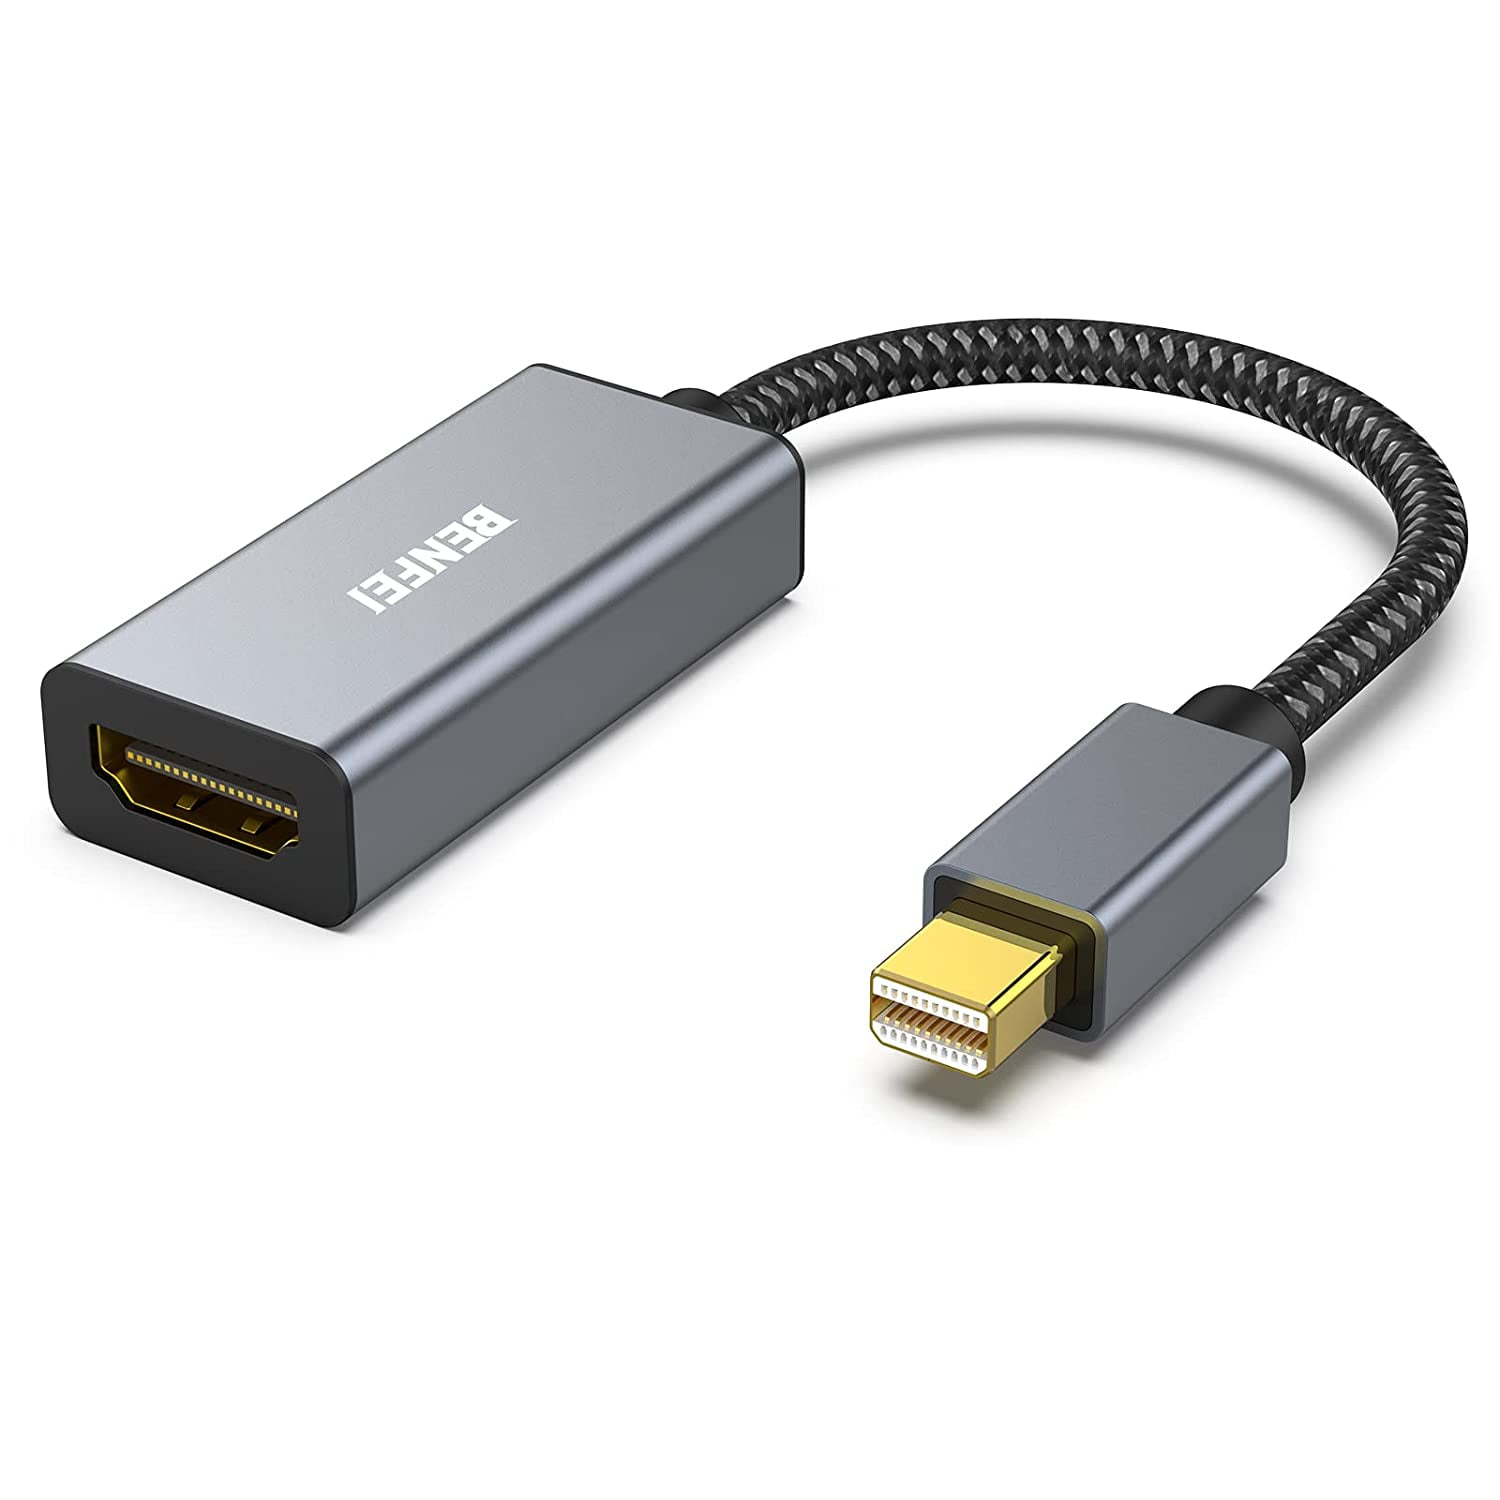 DisplayPort to HDMI Adapter, Benfei Mini DP to HDMI Adapter Compatible with MacBook Air/Pro, Microsoft Surface | Walmart Canada